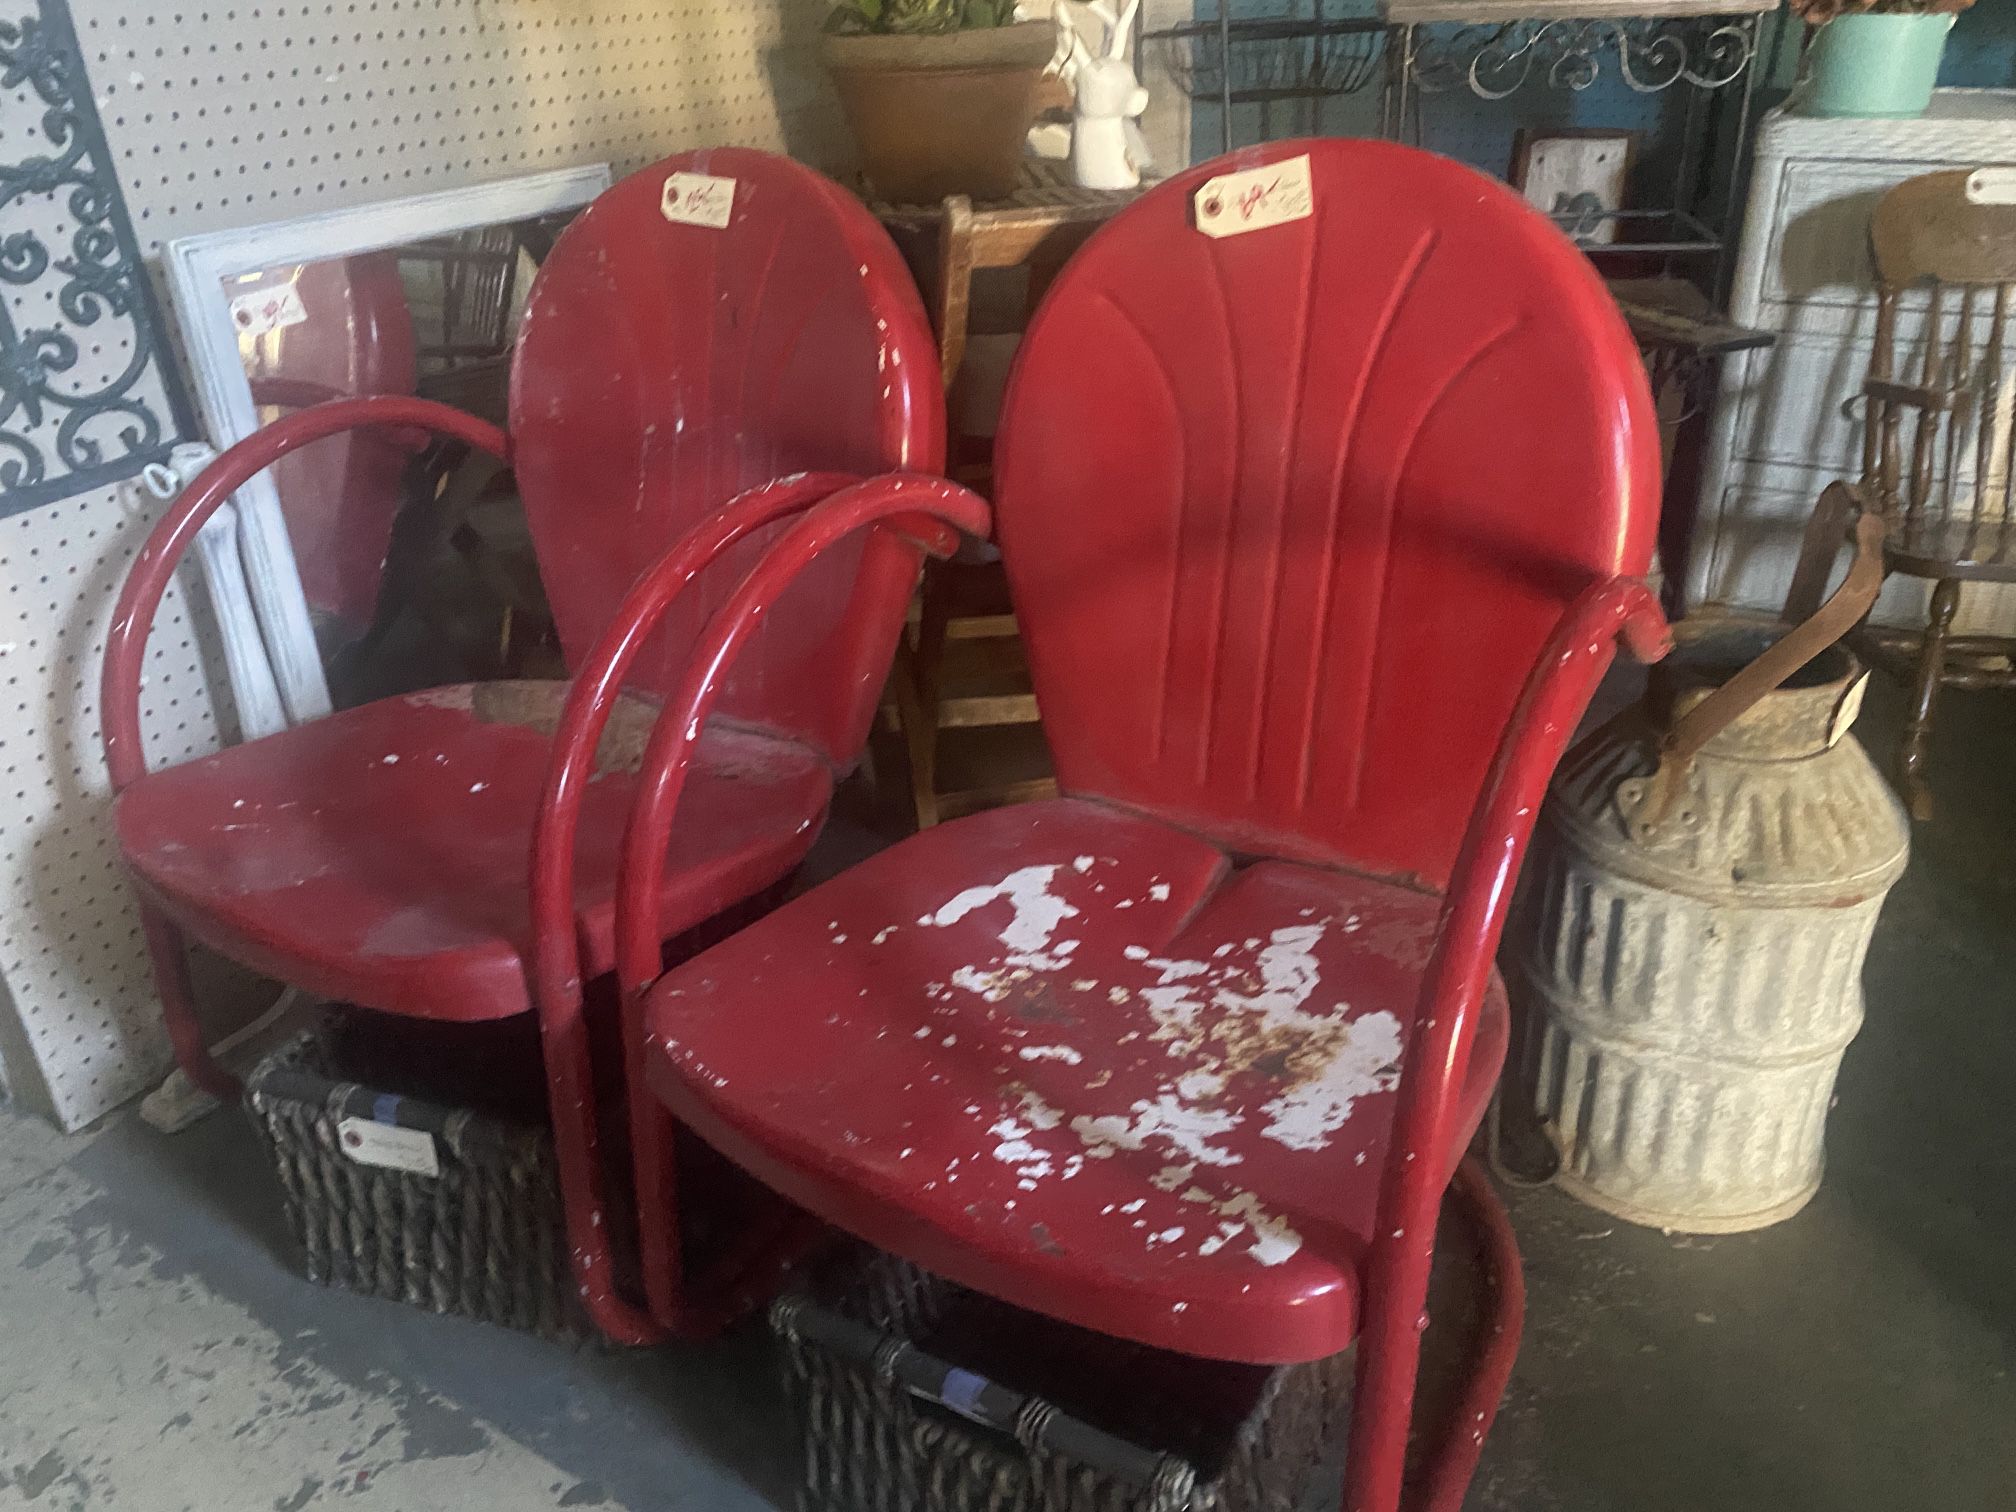 Outside a Vintage chairs